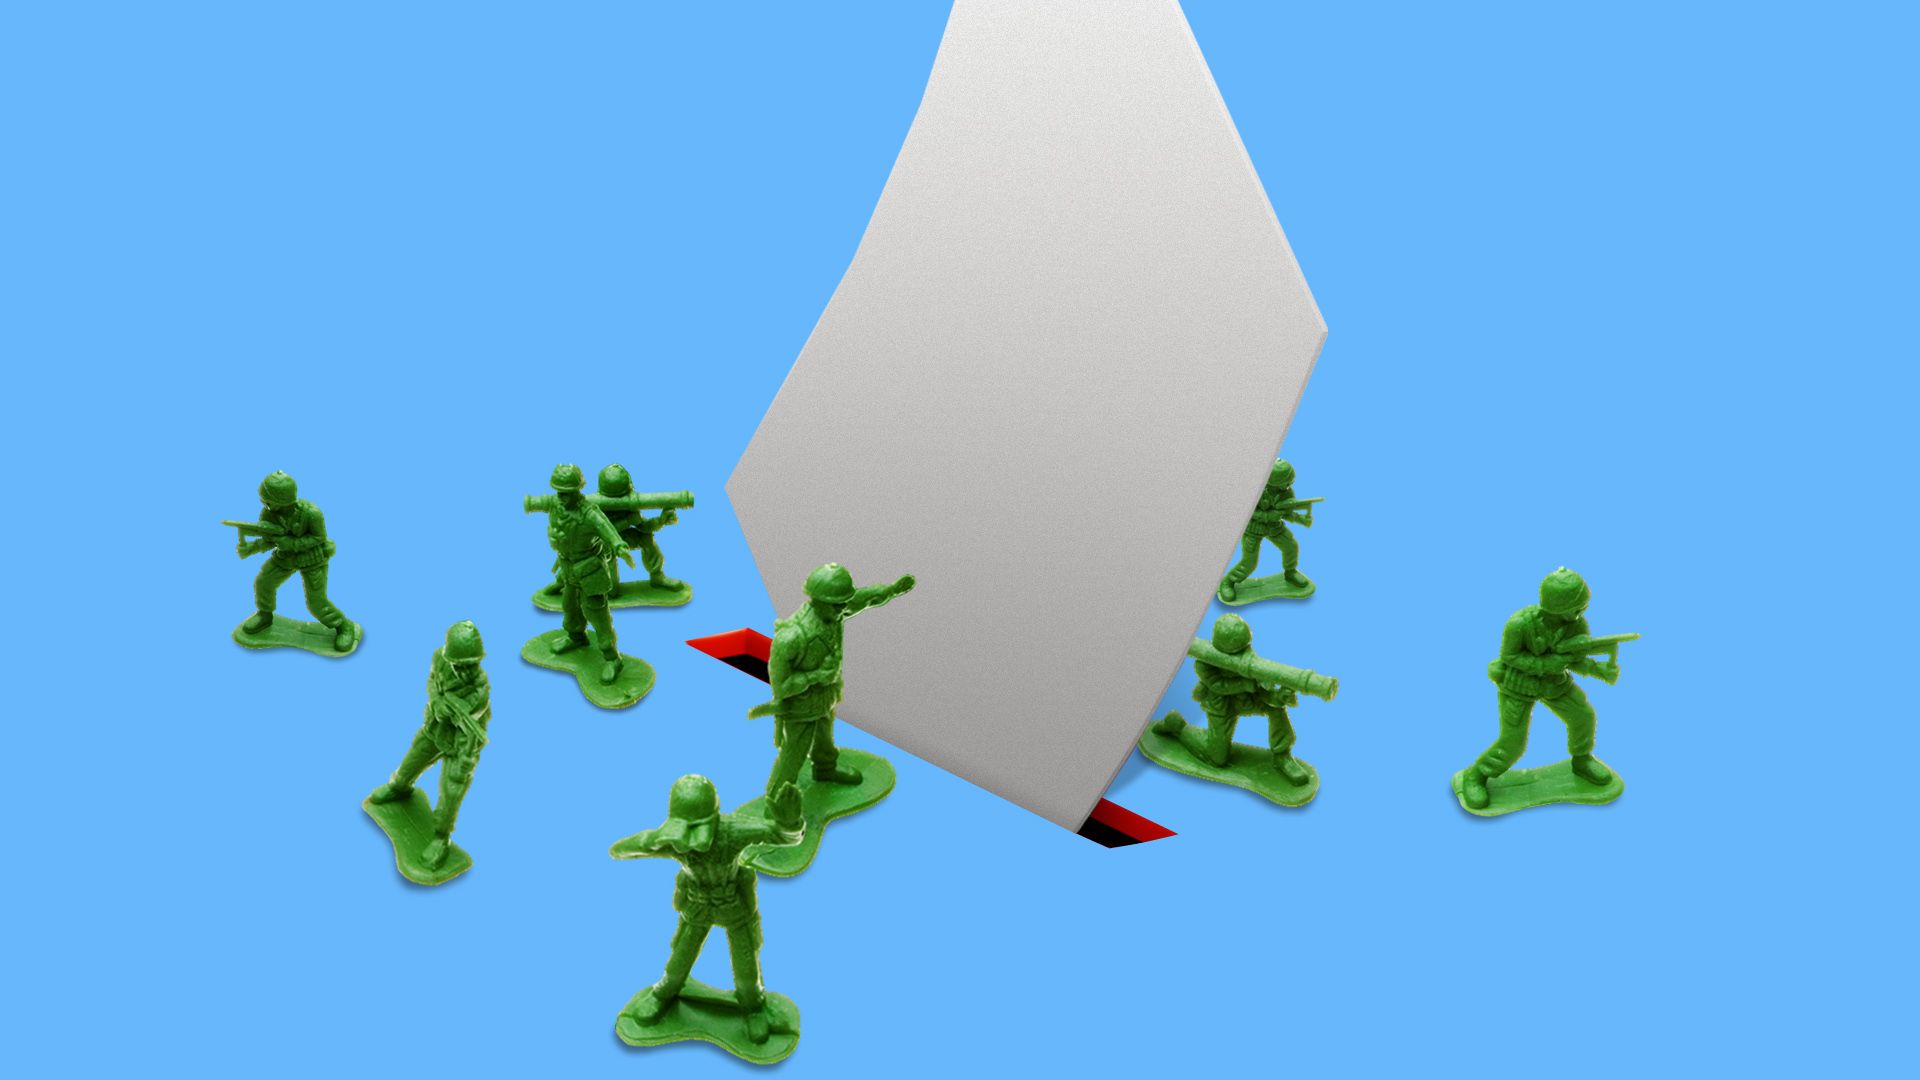 In this illustration, toy soldiers are lined up around a ballot box